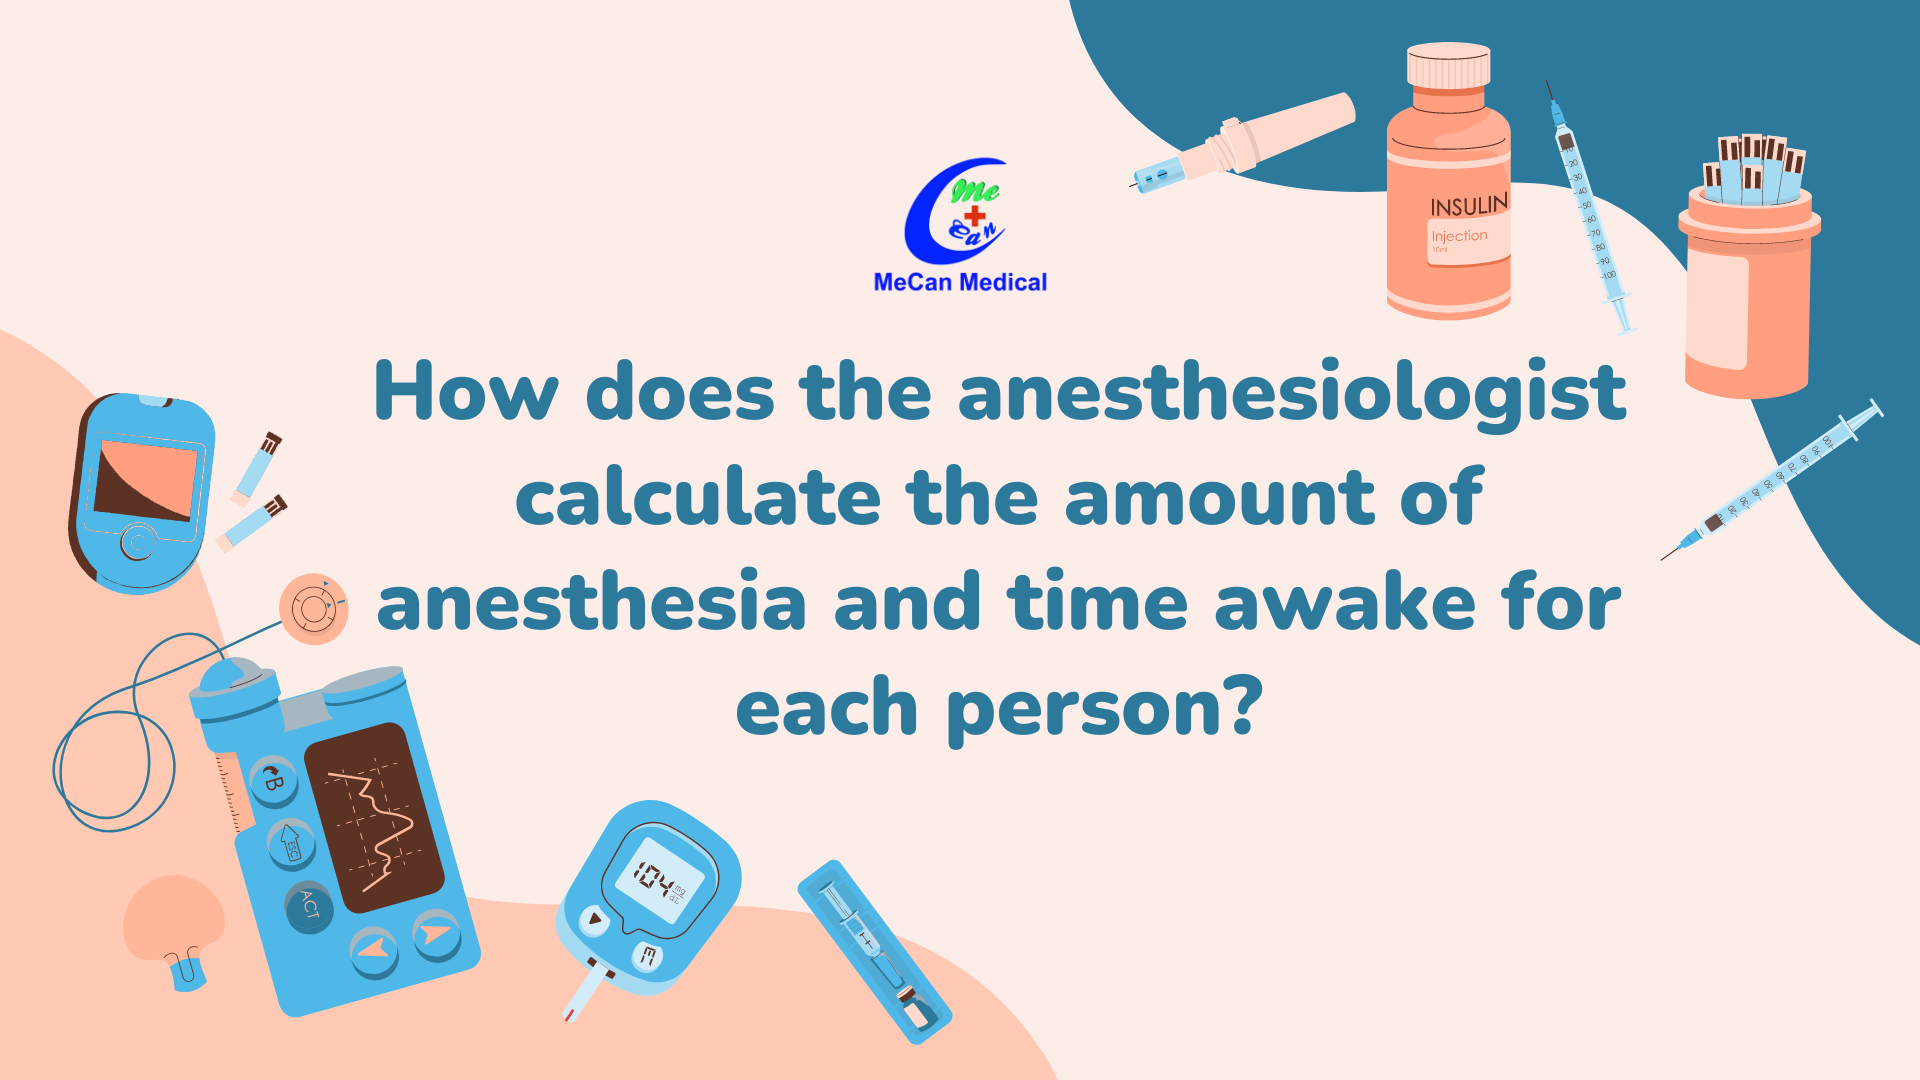 How does the anesthesiologist calculate the amount of anesthesia and time awake for each person?